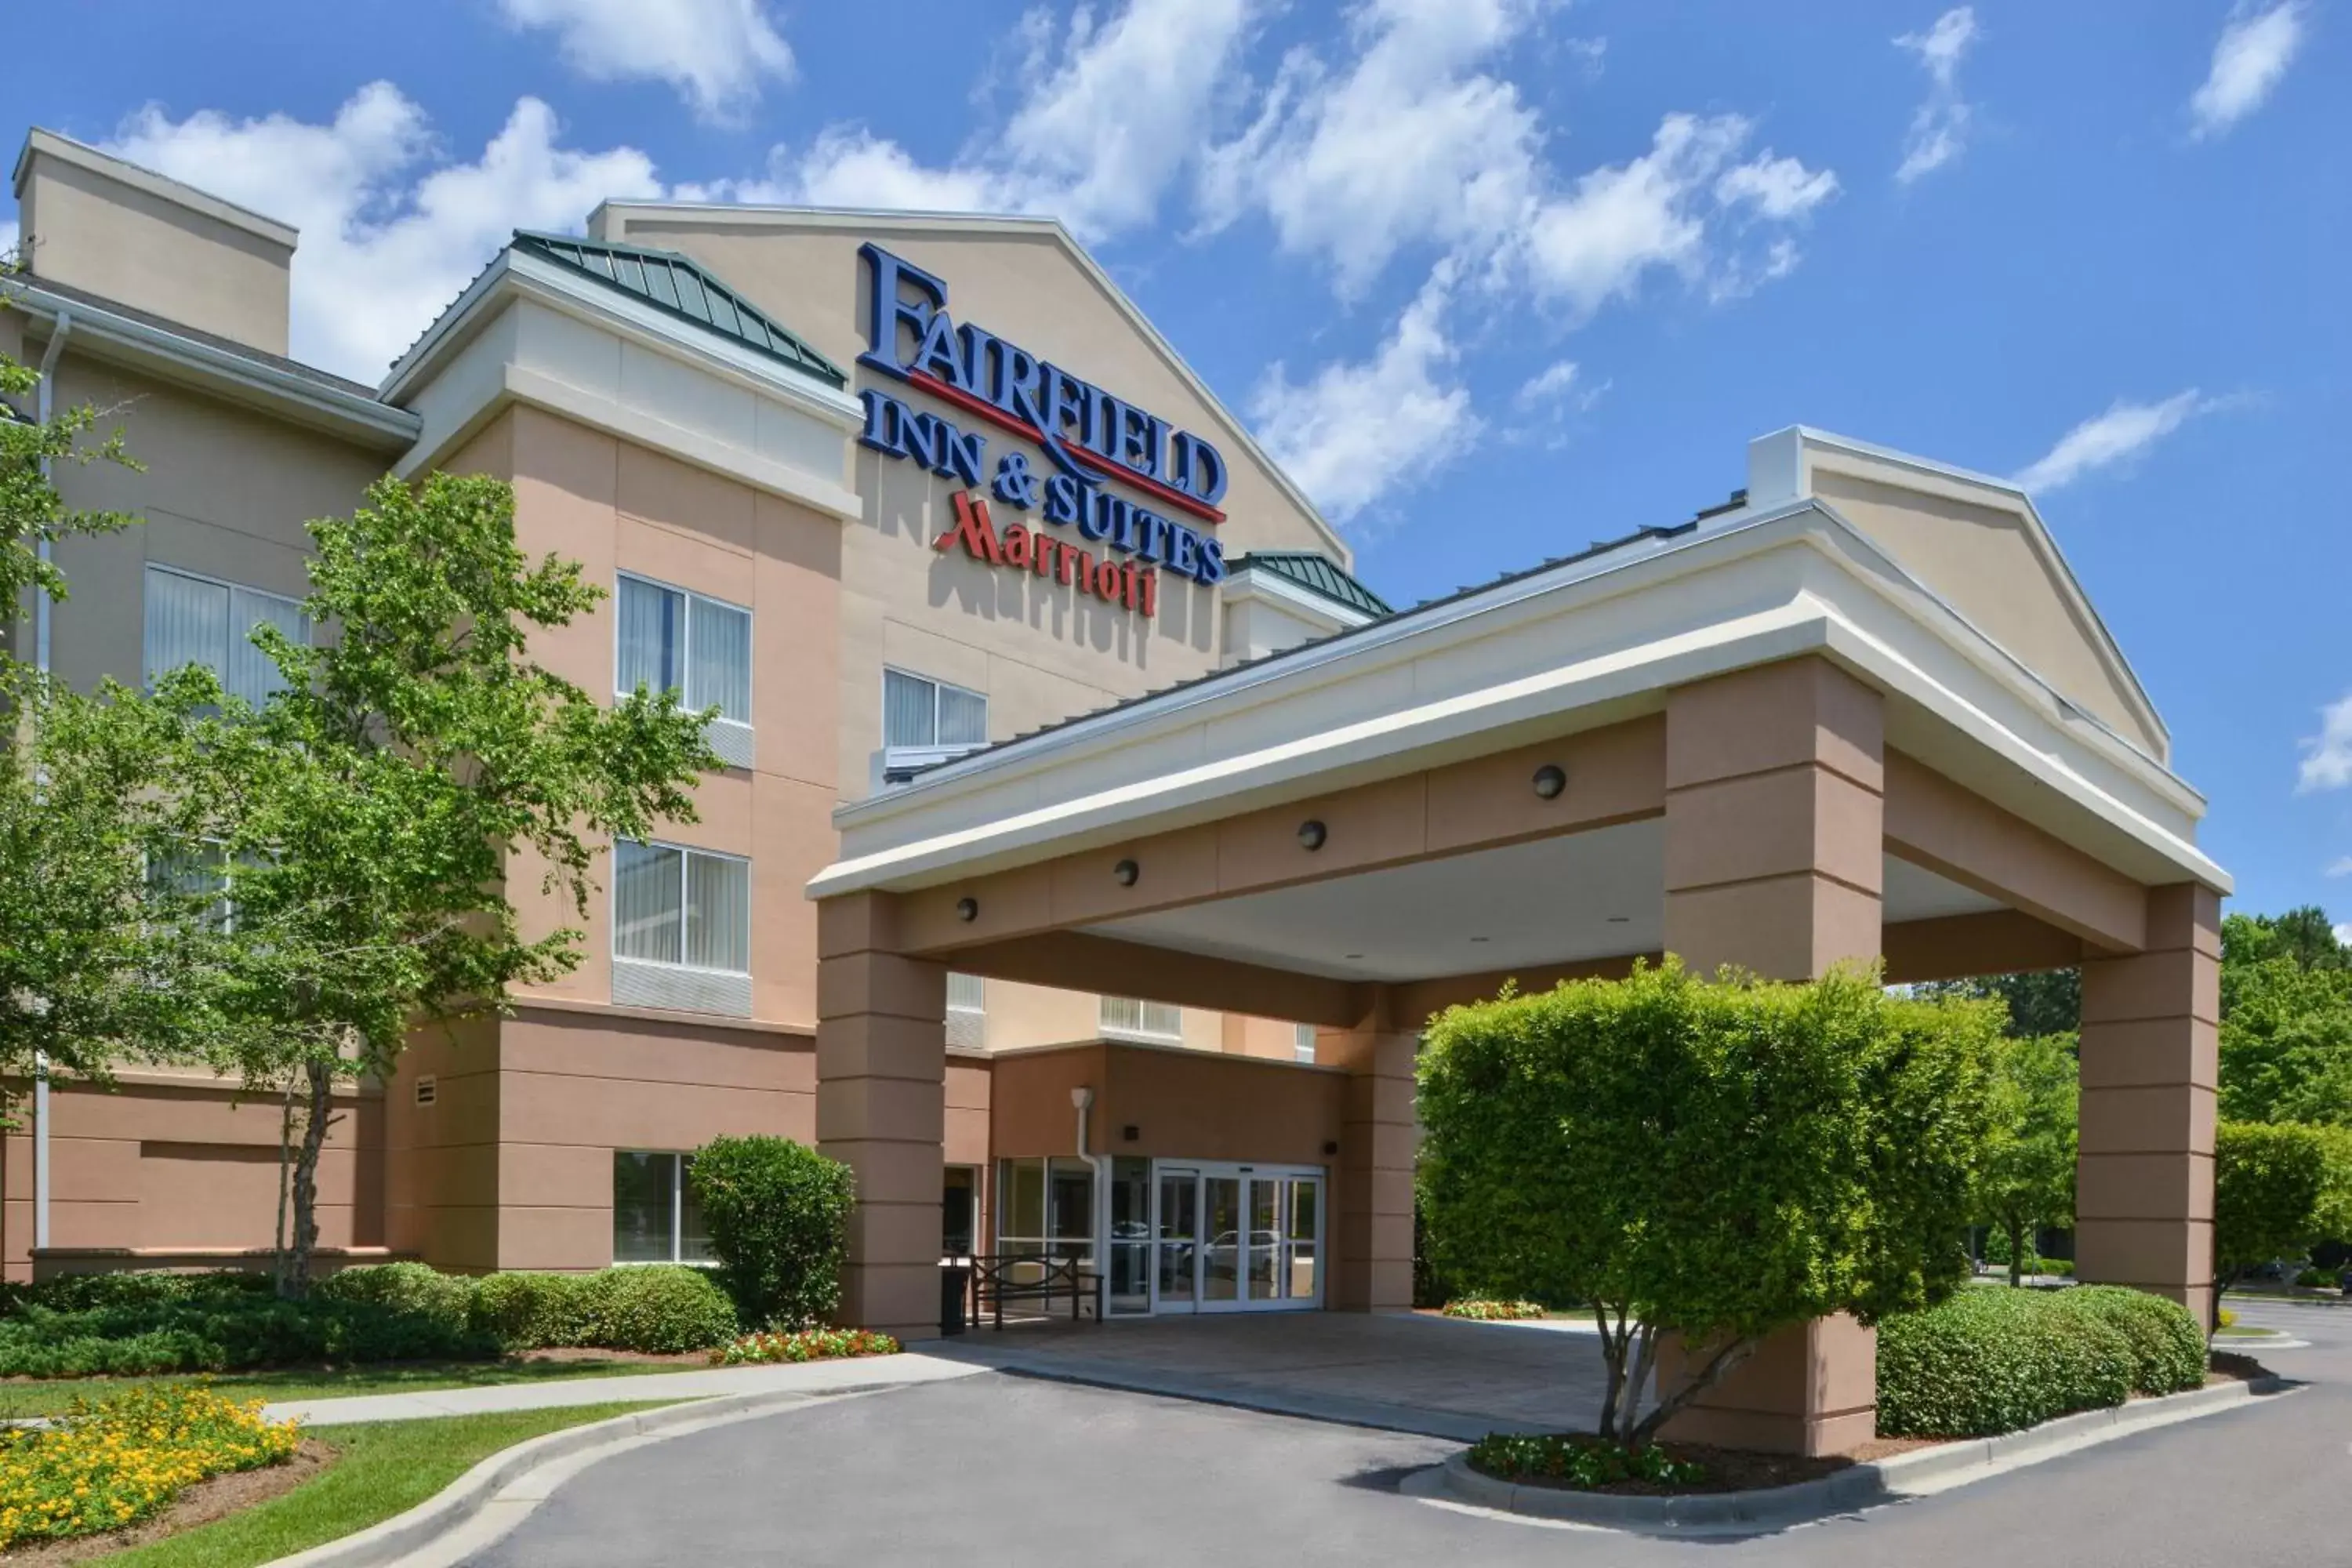 Property Building in Fairfield Inn and Suites Charleston North/University Area